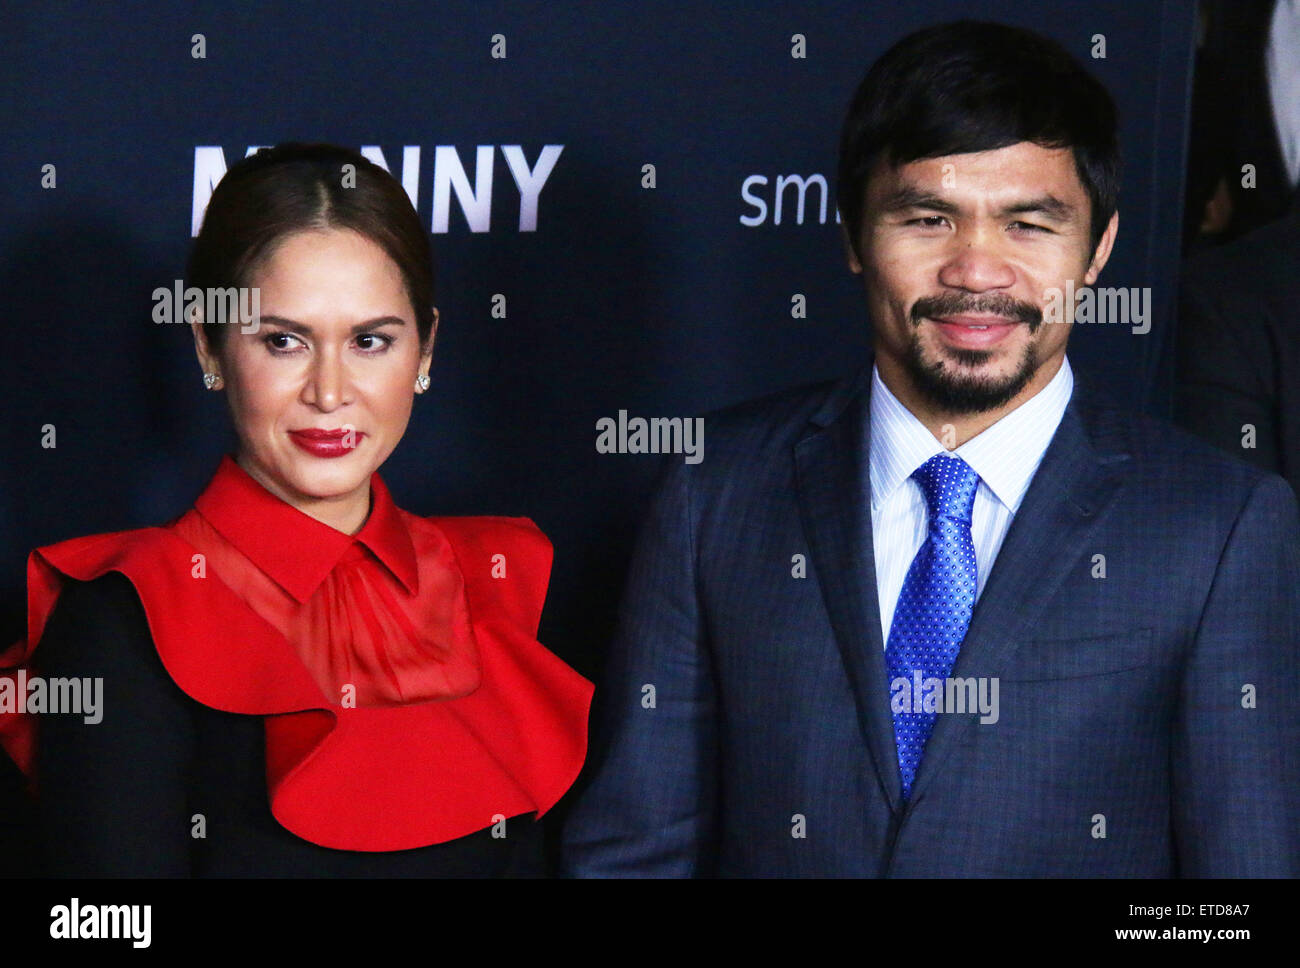 Premiere of 'Manny' at TCL Chinese Theatre - Red Carpet Arrivals  Featuring: Jinkee Pacquiao, Manny Pacquiao Where: Los Angeles, California, United States When: 20 Jan 2015 Credit: WENN.com Stock Photo